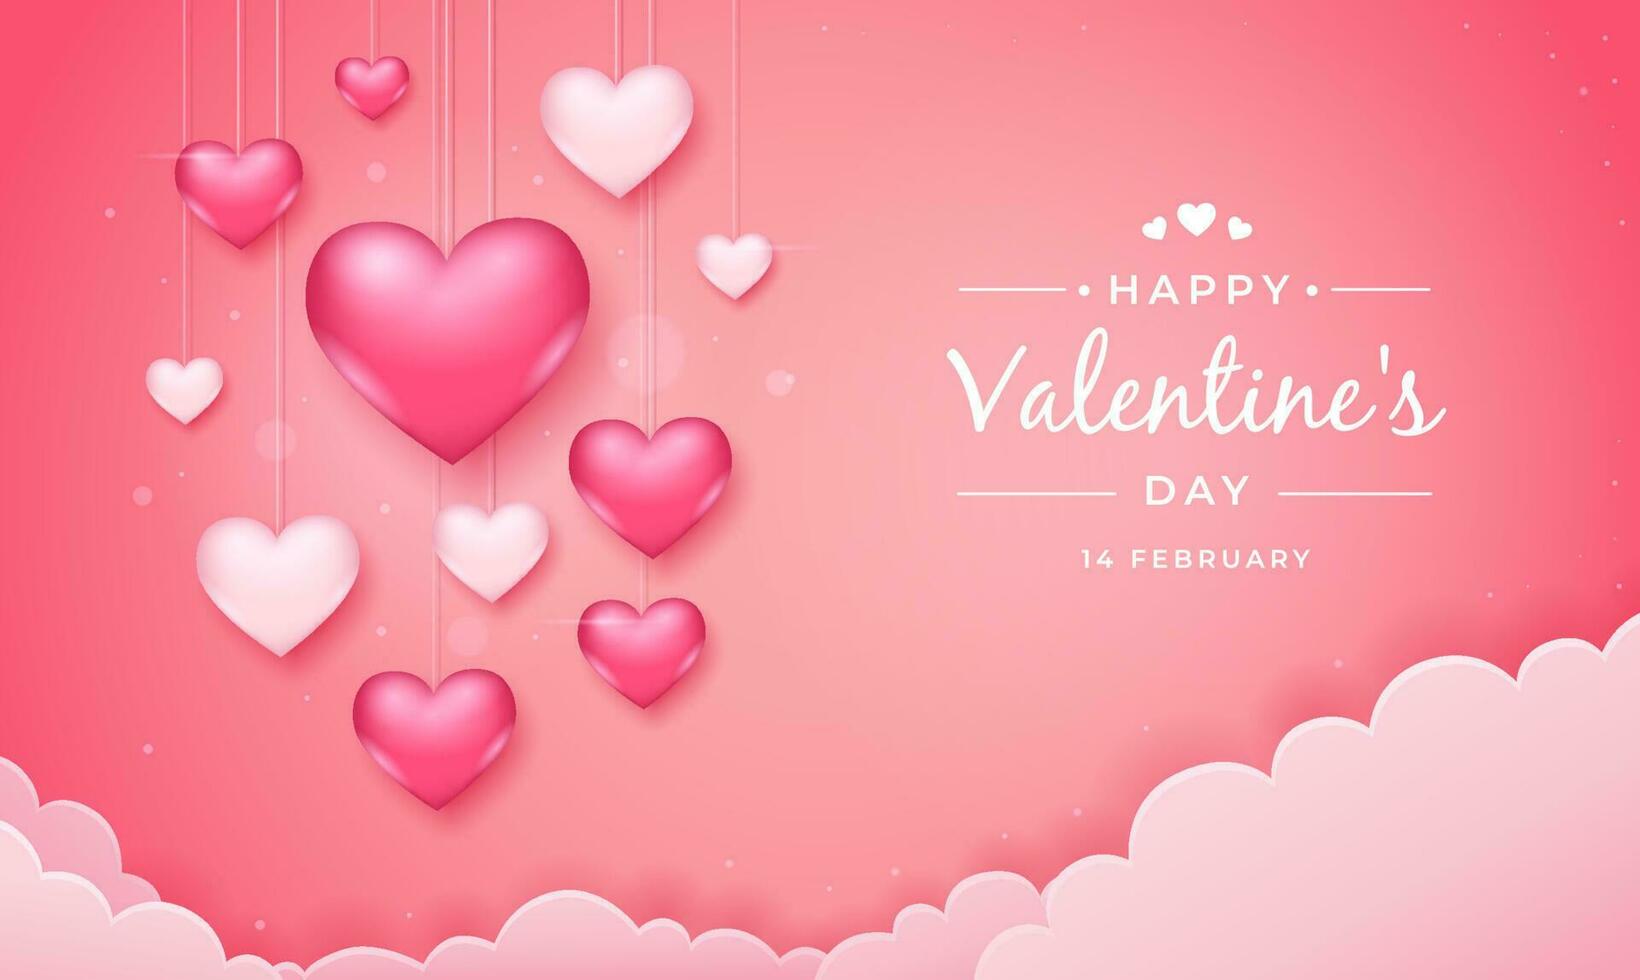 Valentines day background with hanging pink and white hearts vector